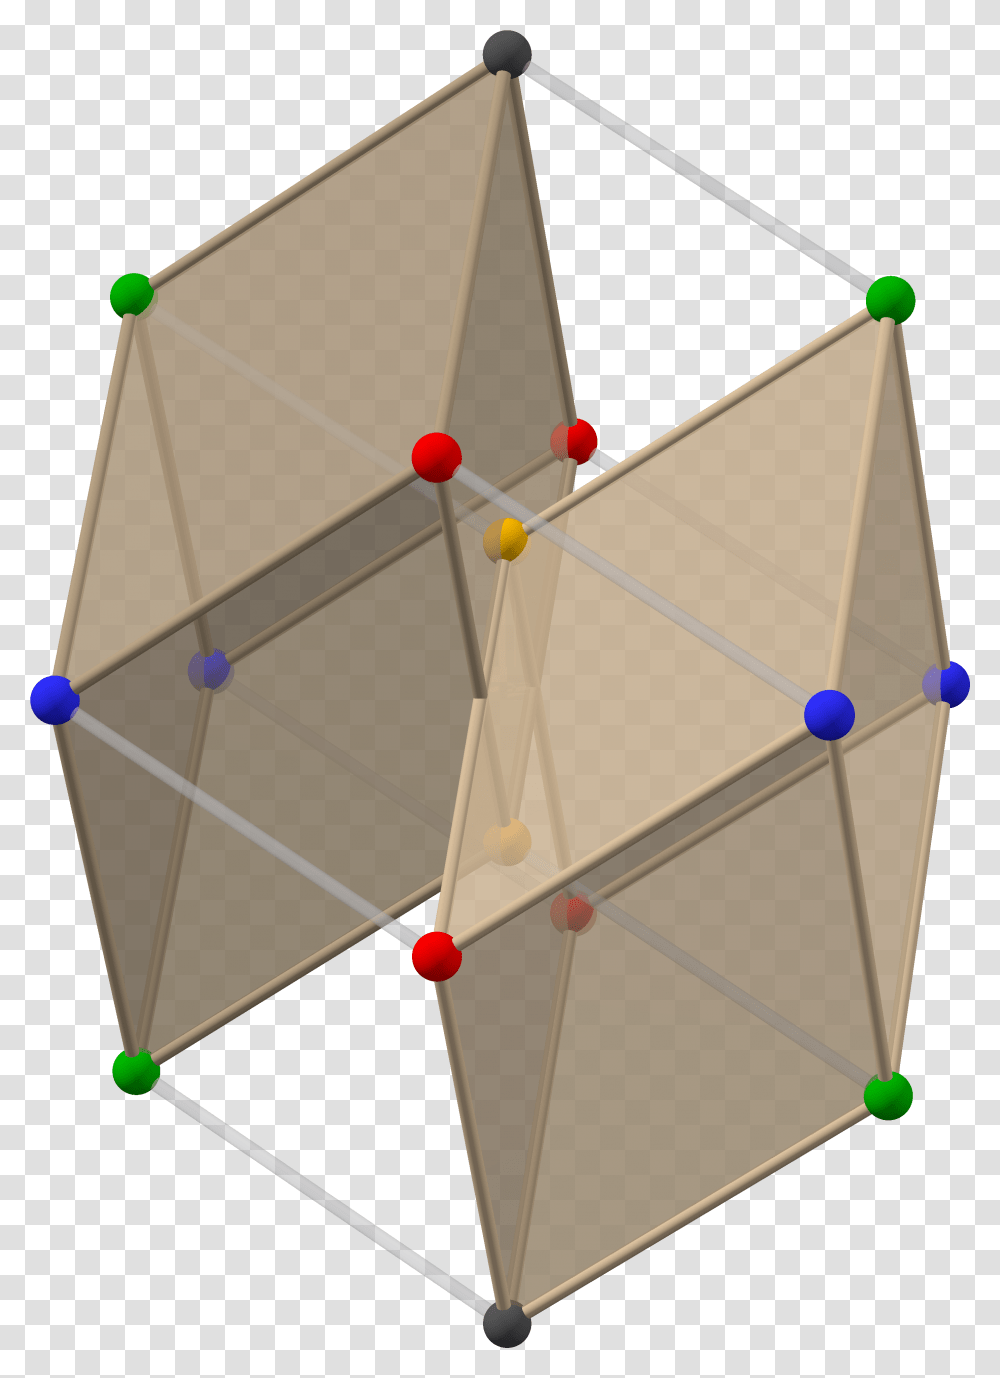 Filegolden Rhombohedra In Bilinski Dodecahedron 0 Acute Tent, Triangle, Star Symbol, Solar Panels, Electrical Device Transparent Png